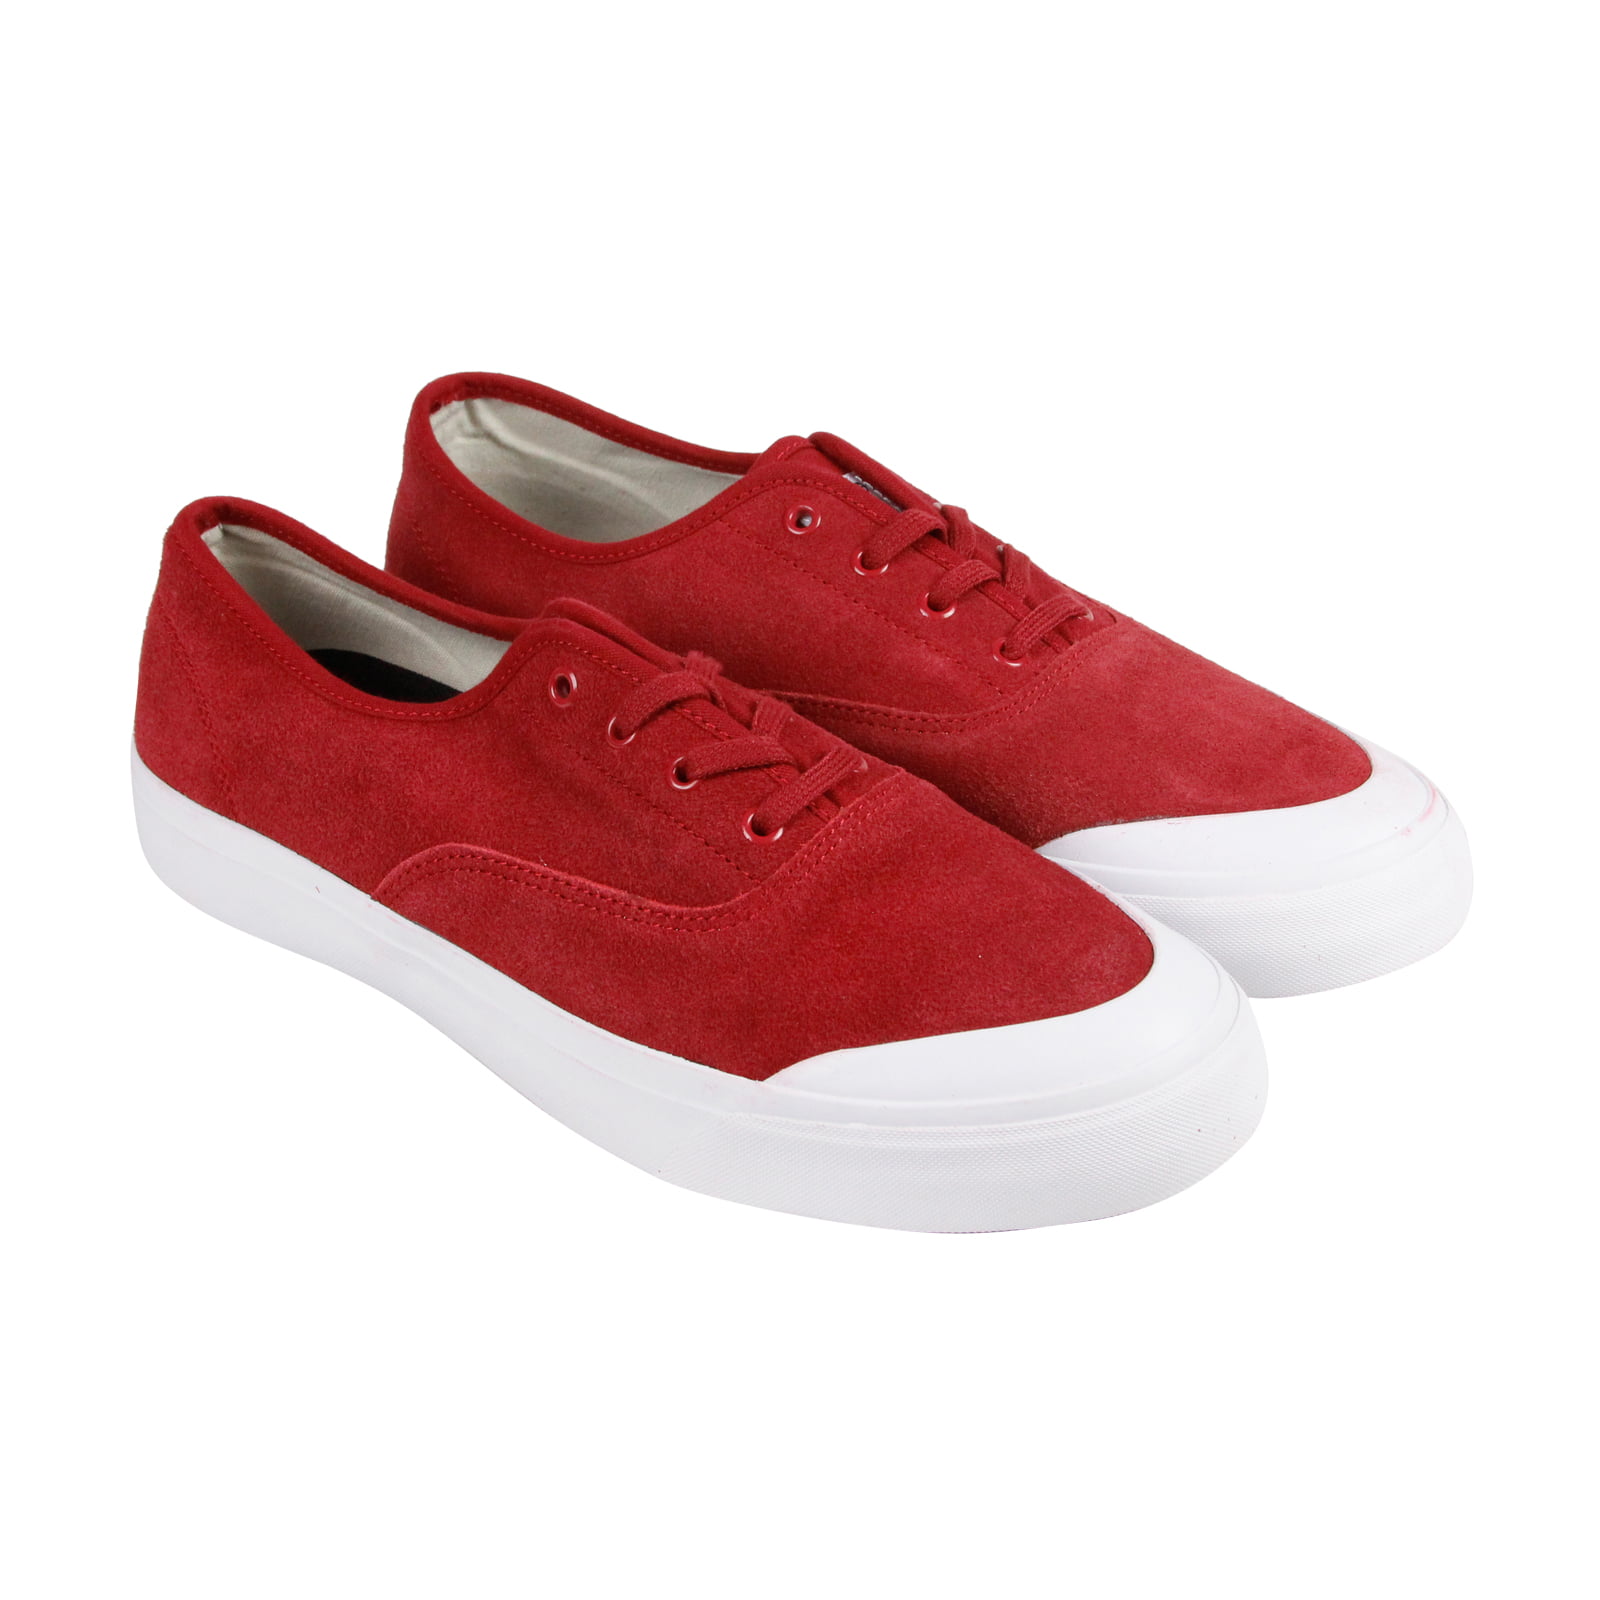 HUF - HUF Cromer Mens Red Suede Lace Up 